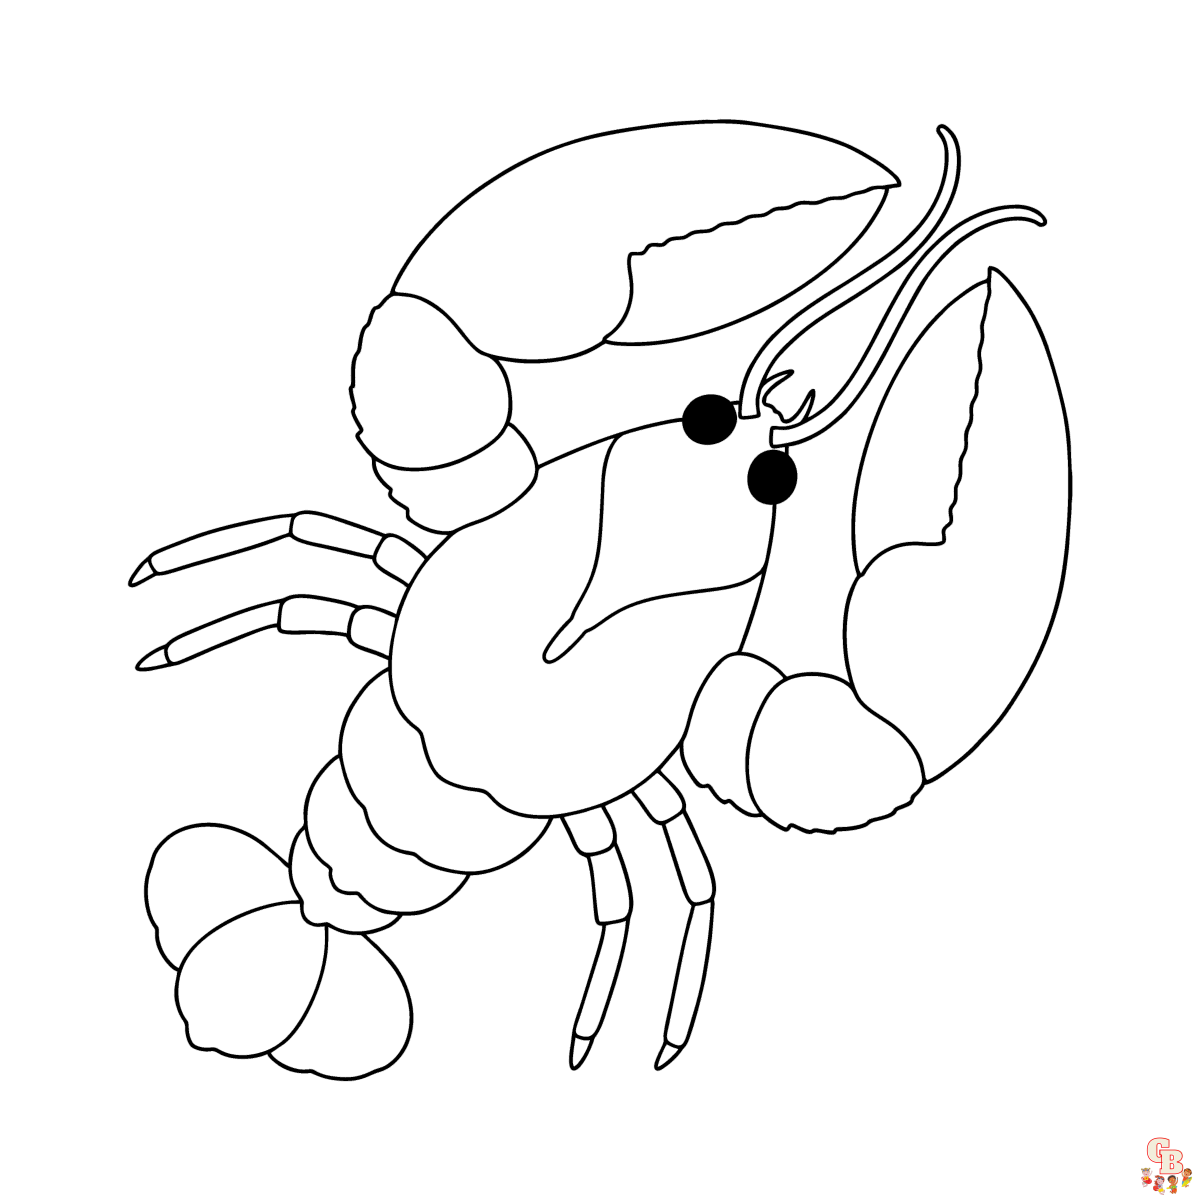 Free Lobster Coloring Pages for Kids: Printable and Easy to Print